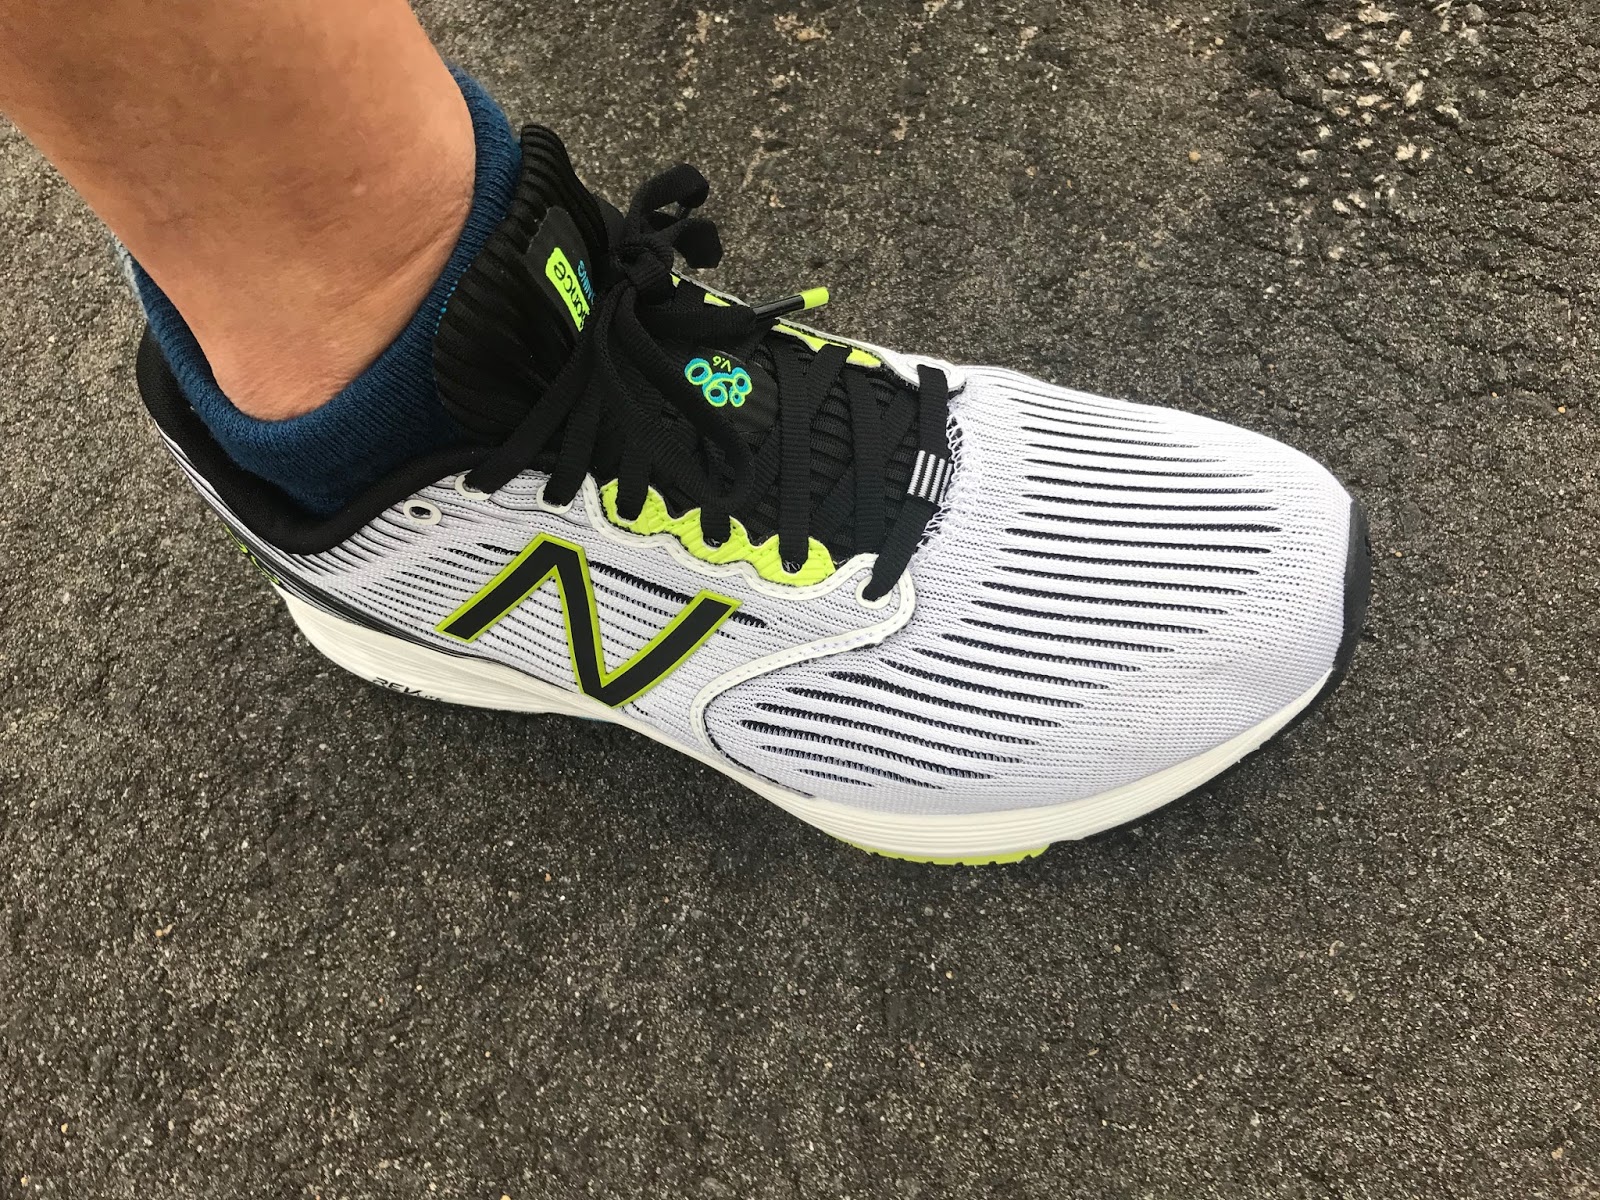 Road Trail Run: New Balance 890v6 Review: A Firm, Stable Rocket